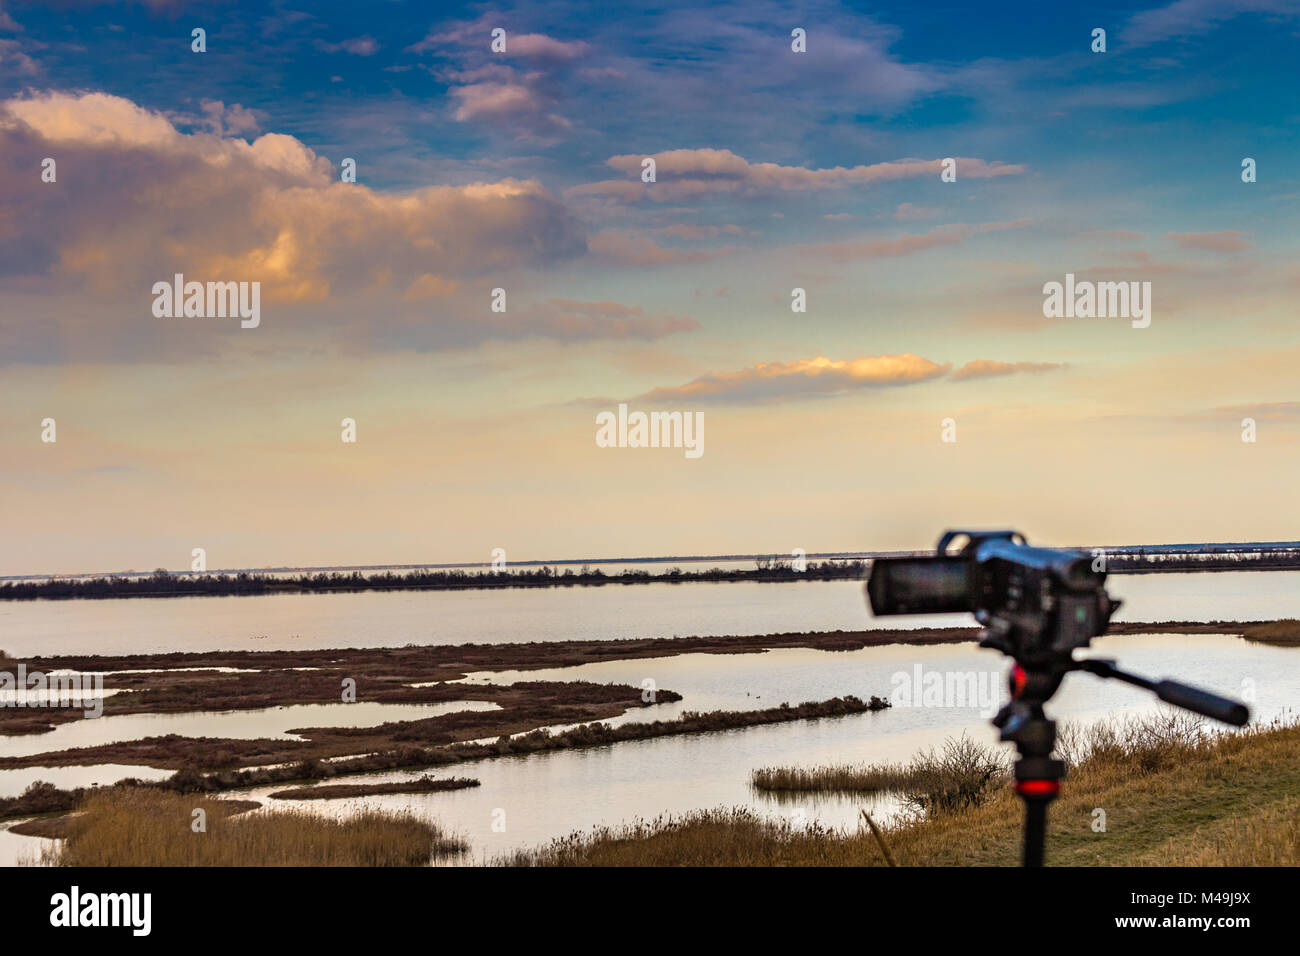 Videography from camcorder on tripod shooting cloudy sky over wild lagoon in winter Stock Photo